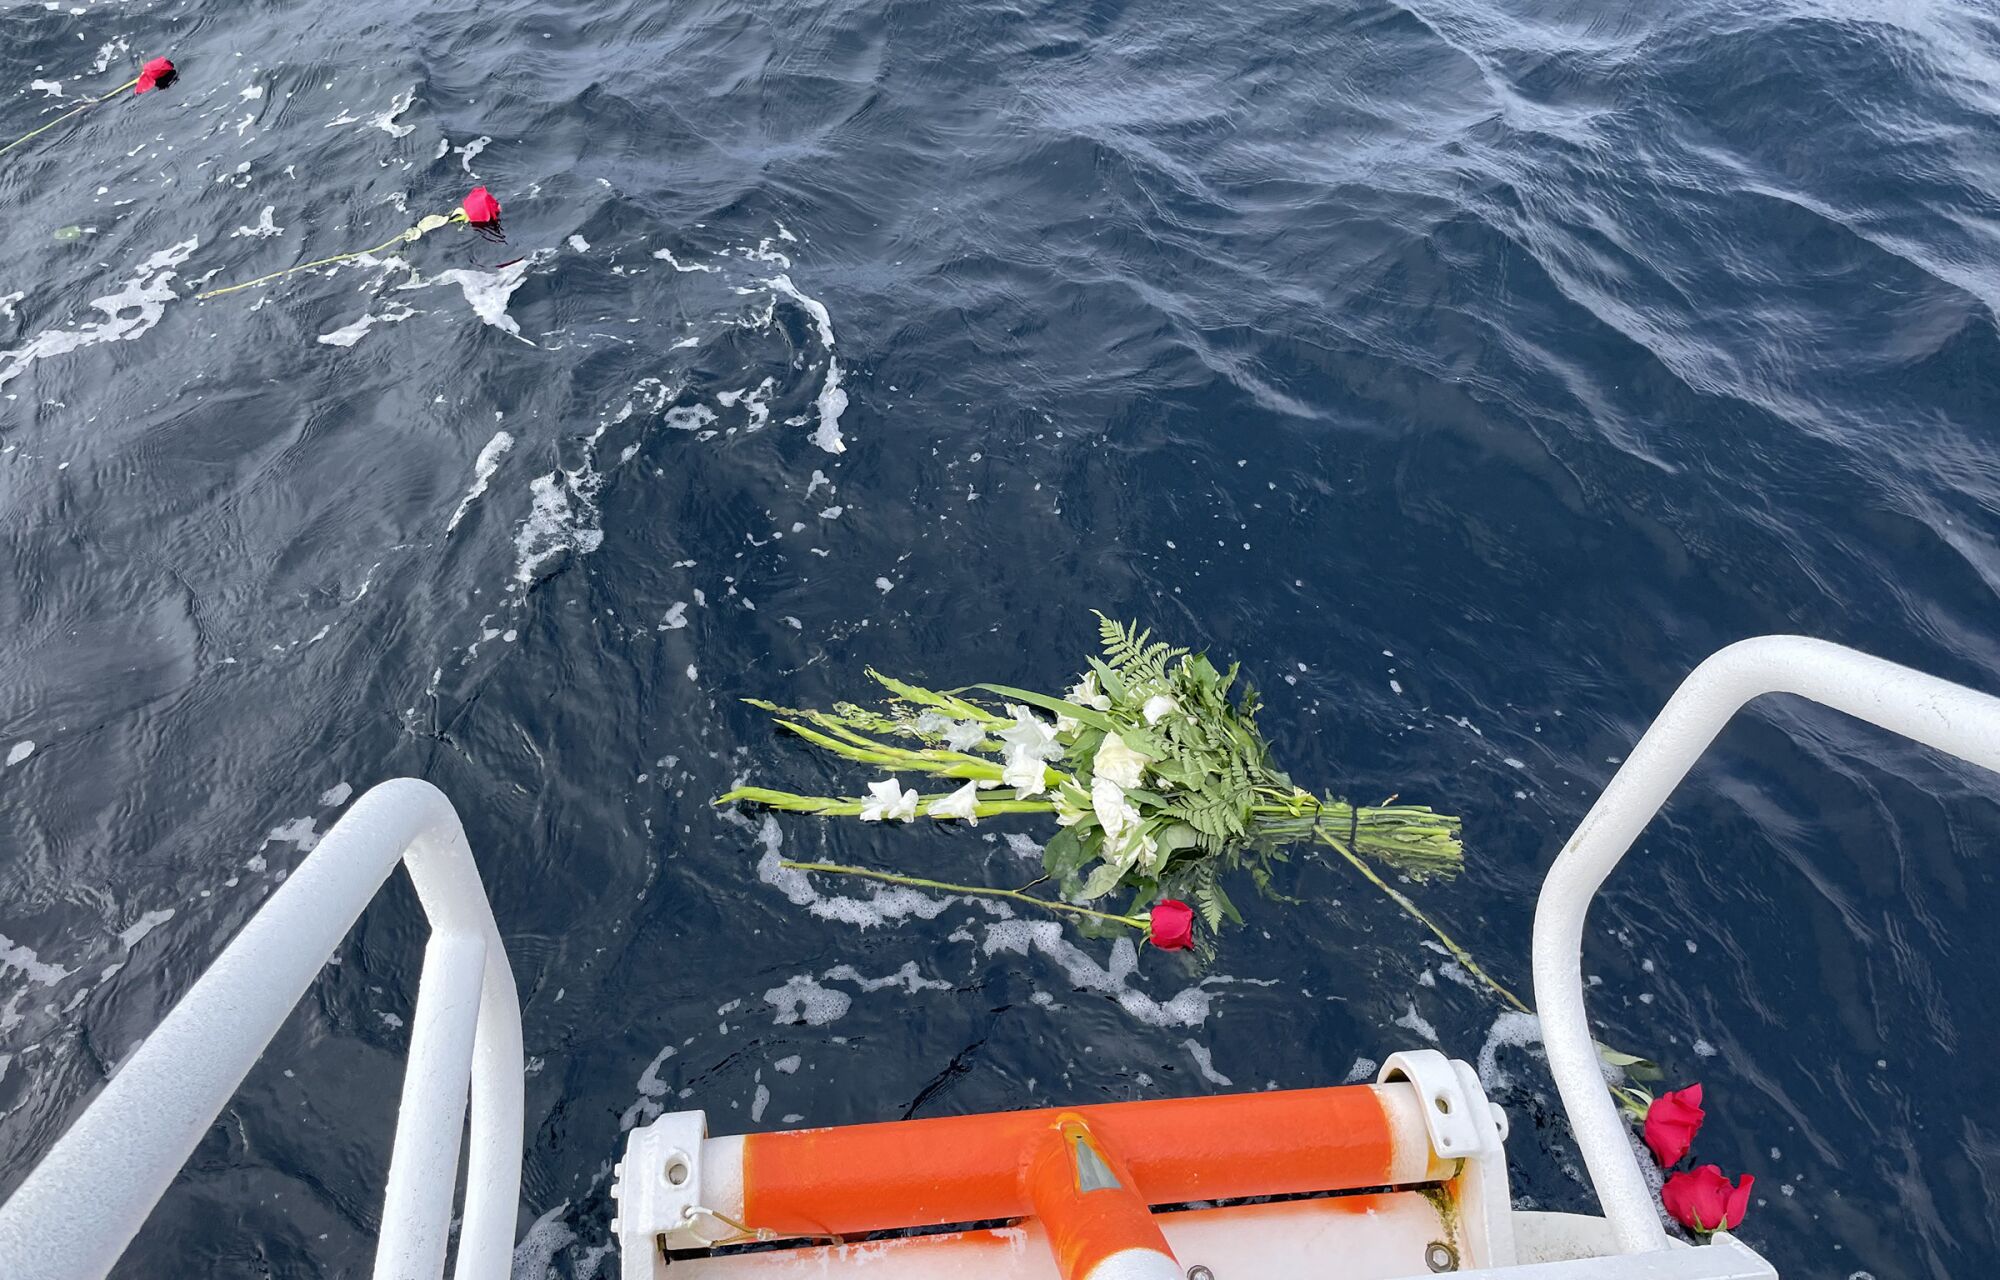 Flowers were dropped off the boat at the site of the helicopter crash.